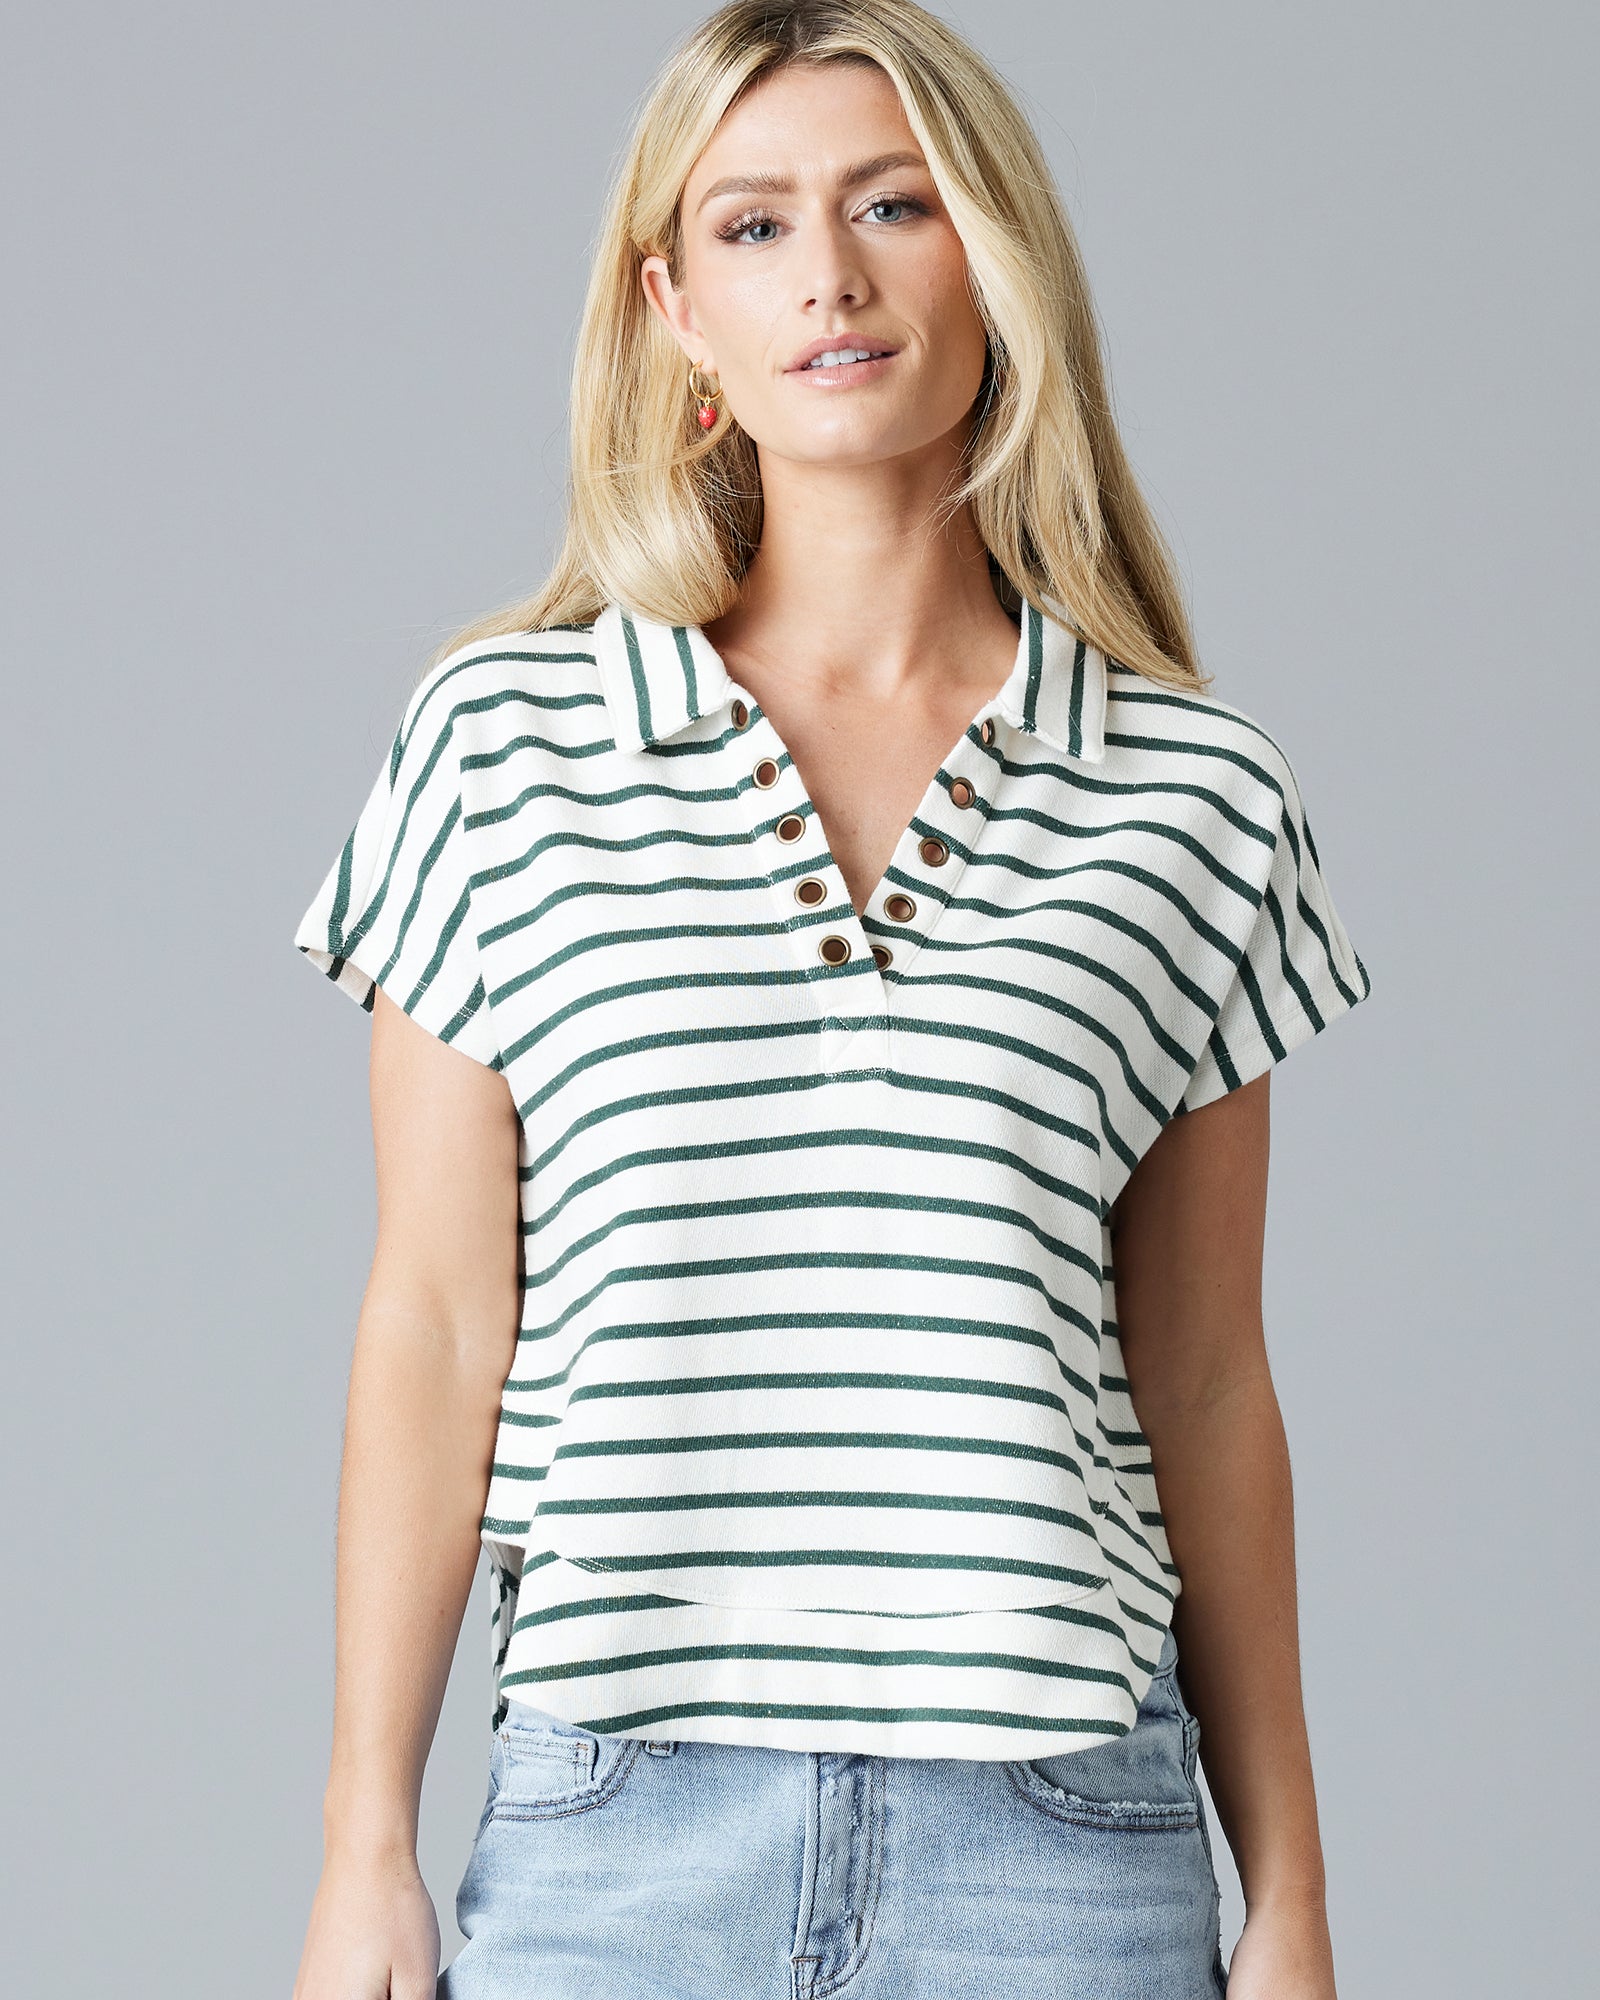 Woman in a green and white striped, short sleeve, v-neck with collar sweater